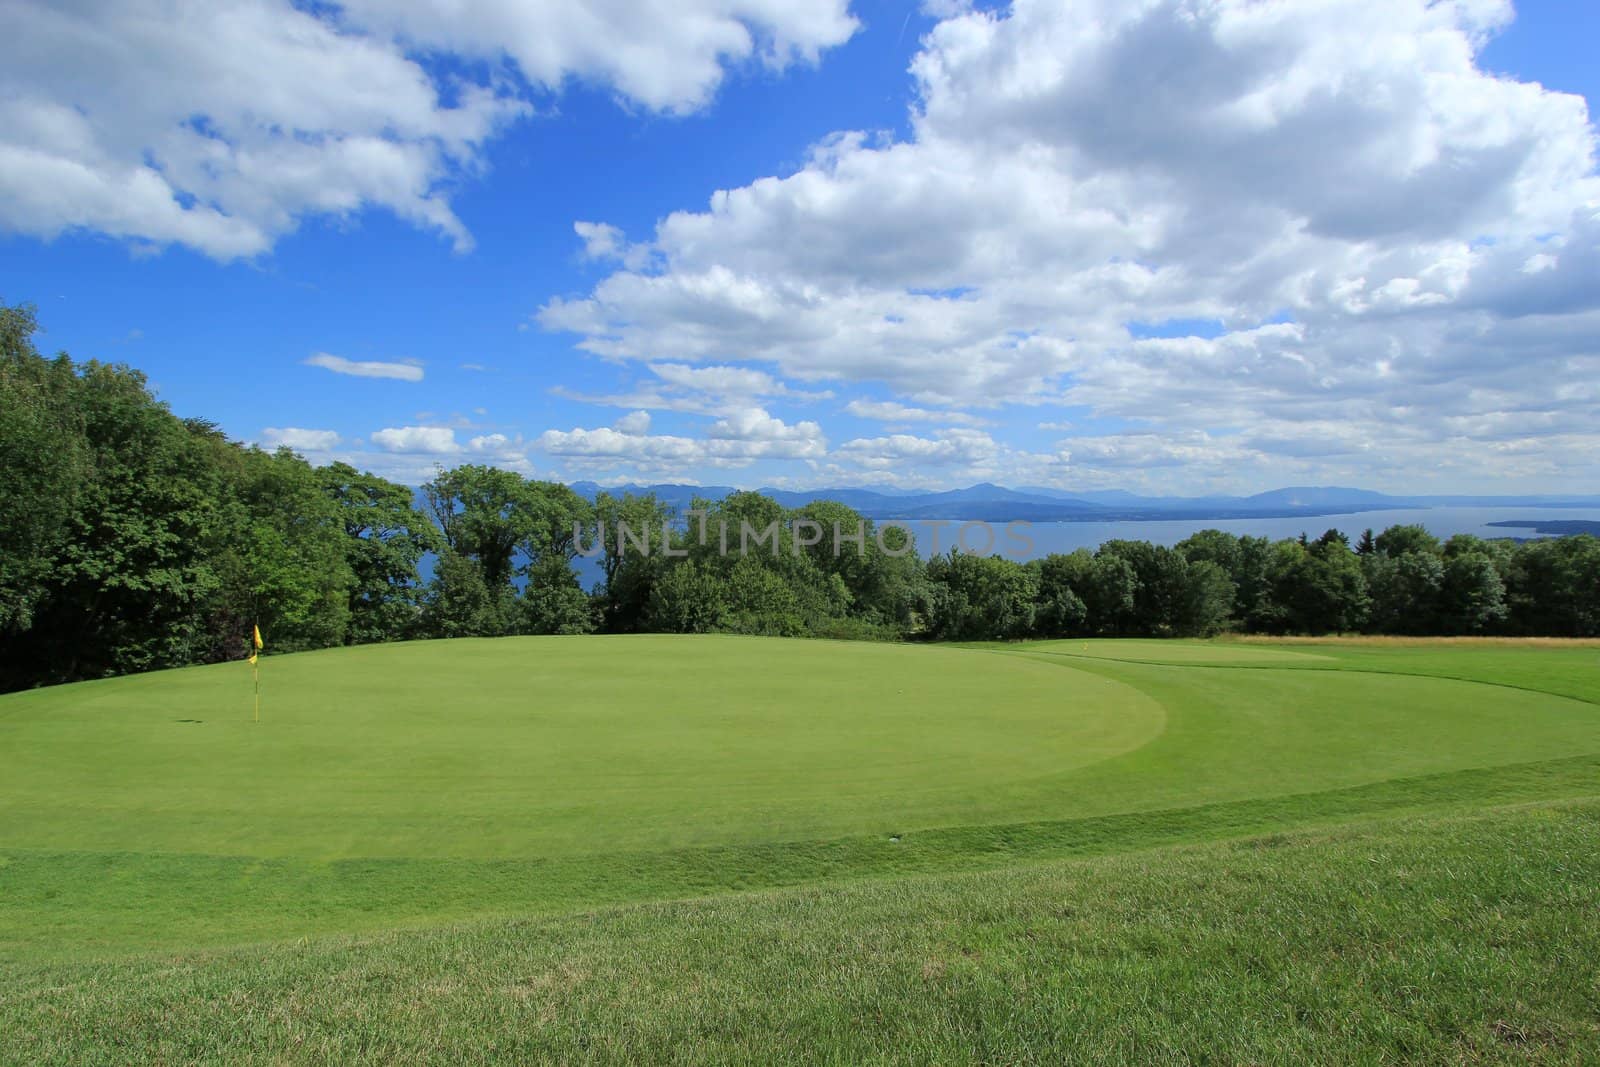 Golf course by Geneva lake by cloudy weather, Switzerland